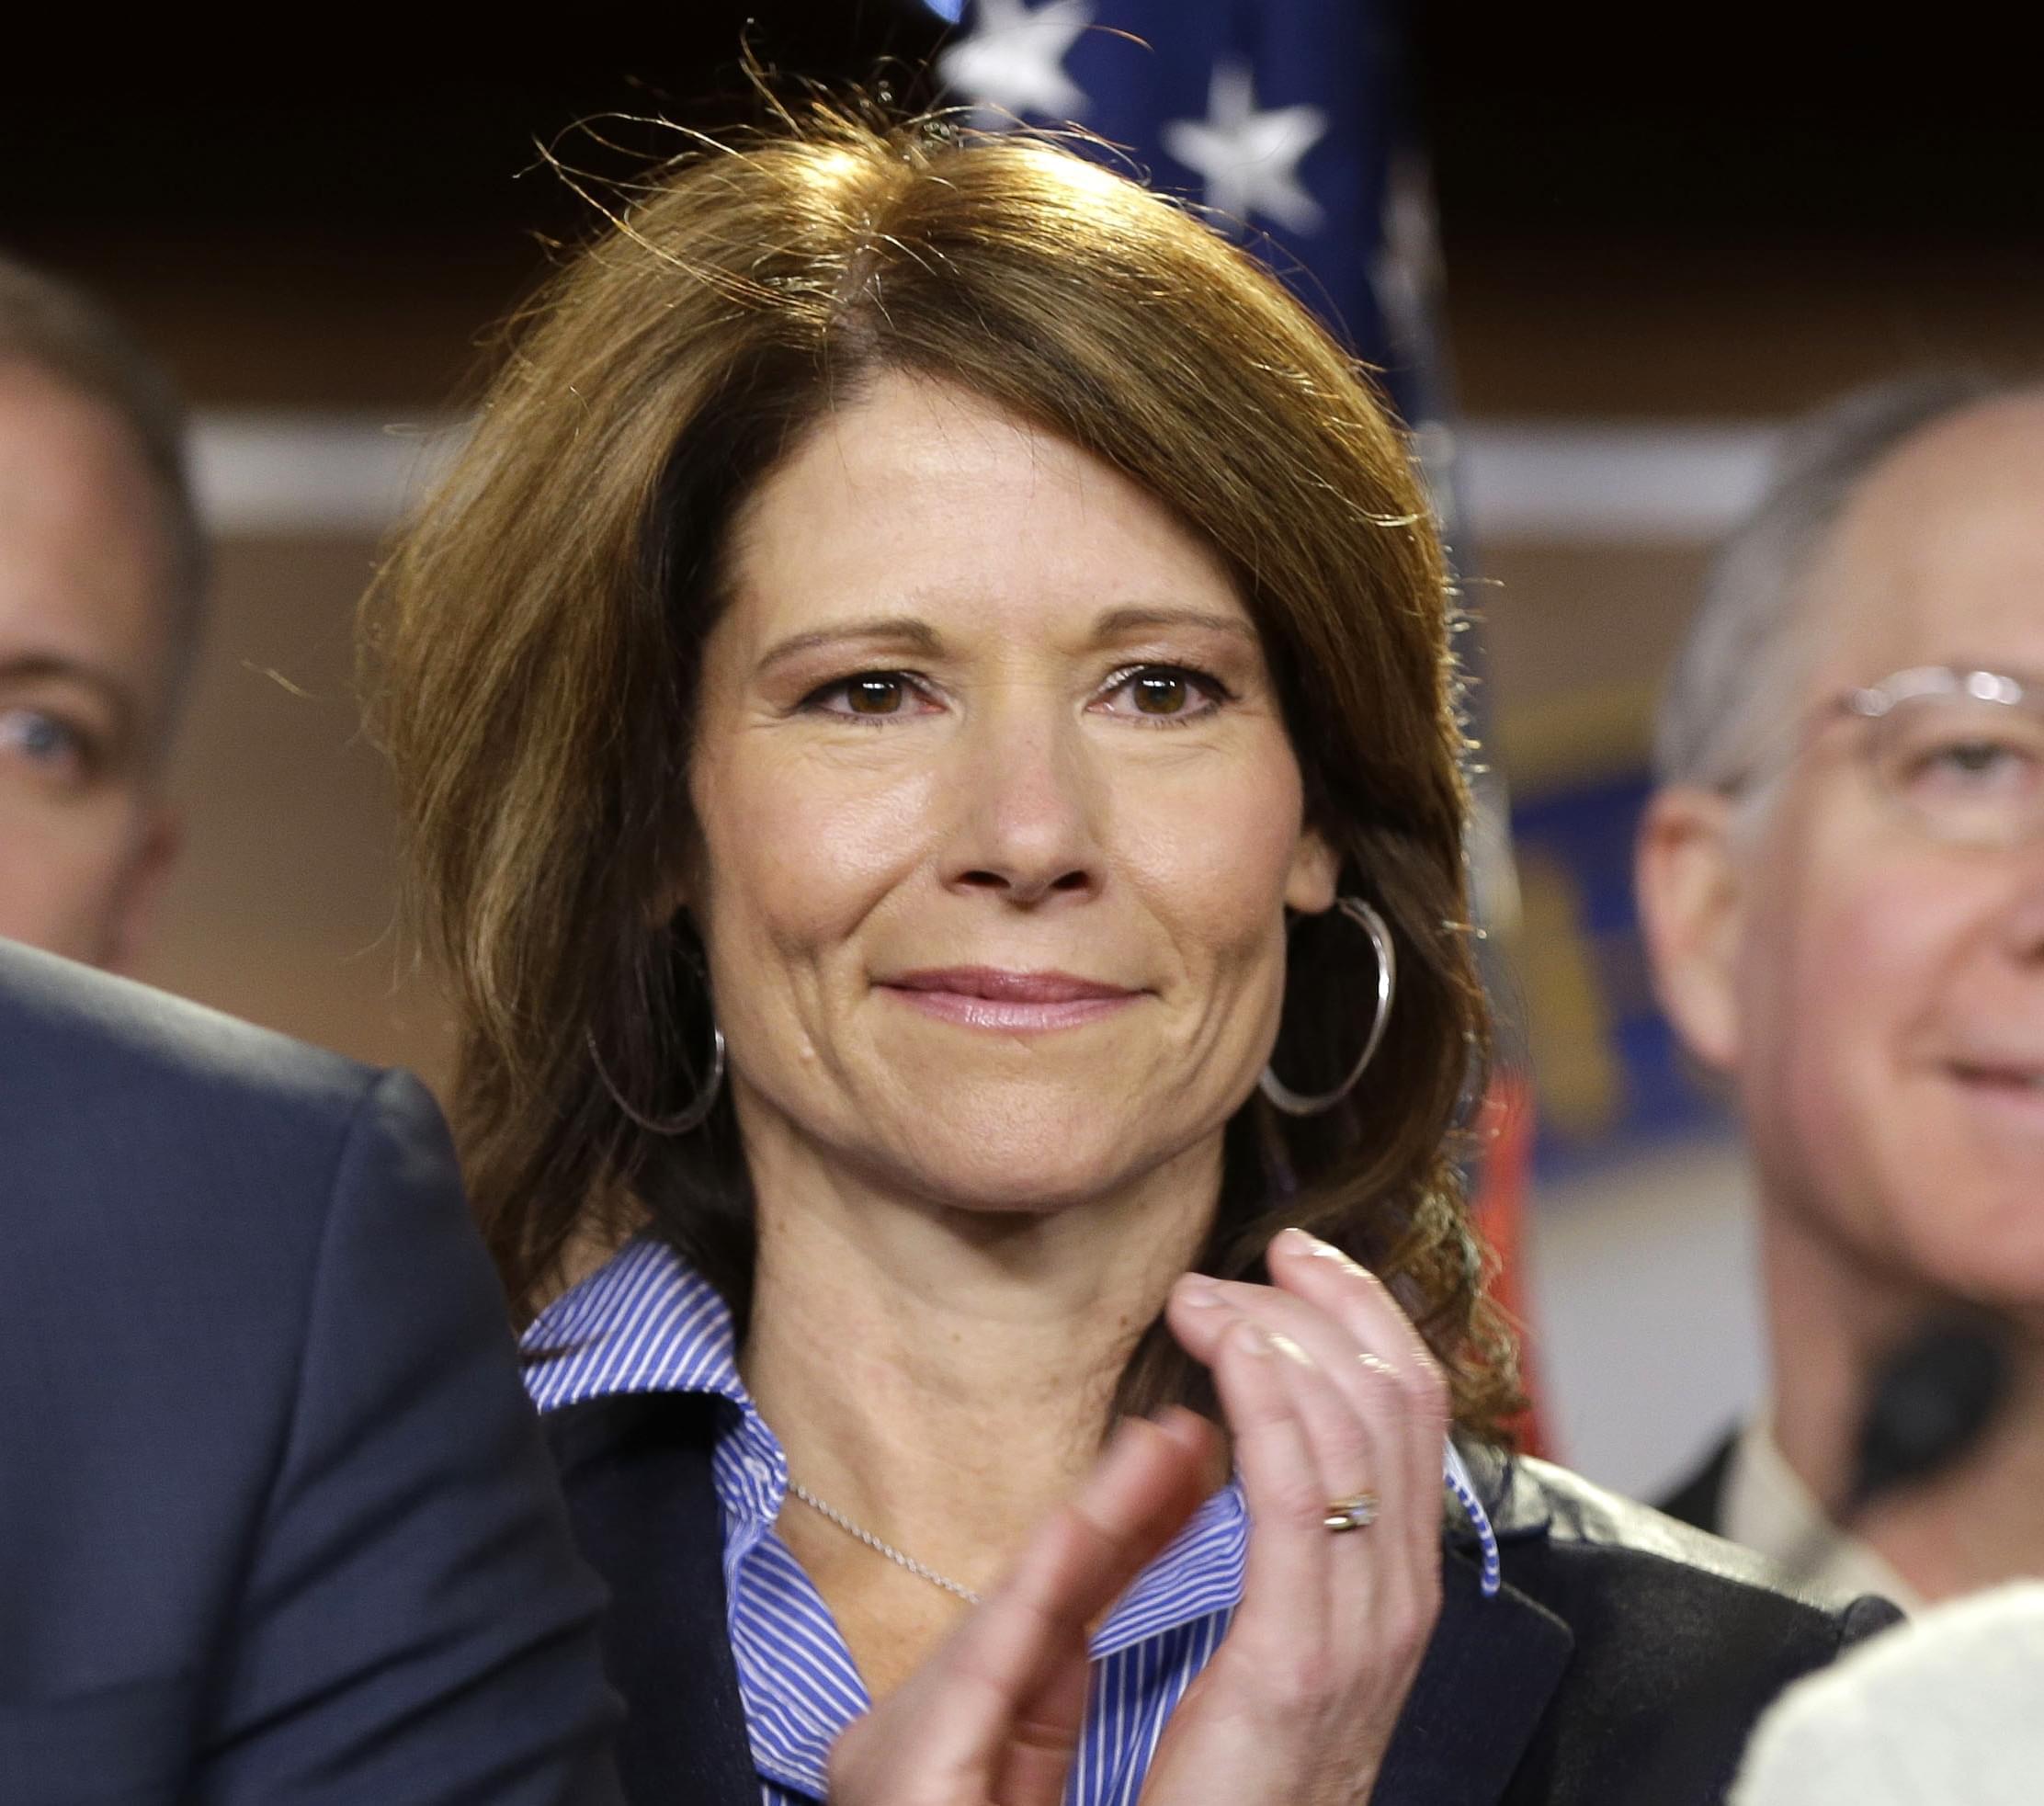 Rep.-elect Cheri Bustos D-Ill. is seen on stage during a news conference with newly elected Democratic House members, on Capitol Hill in Washington, Tuesday, Nov. 13, 2012. 